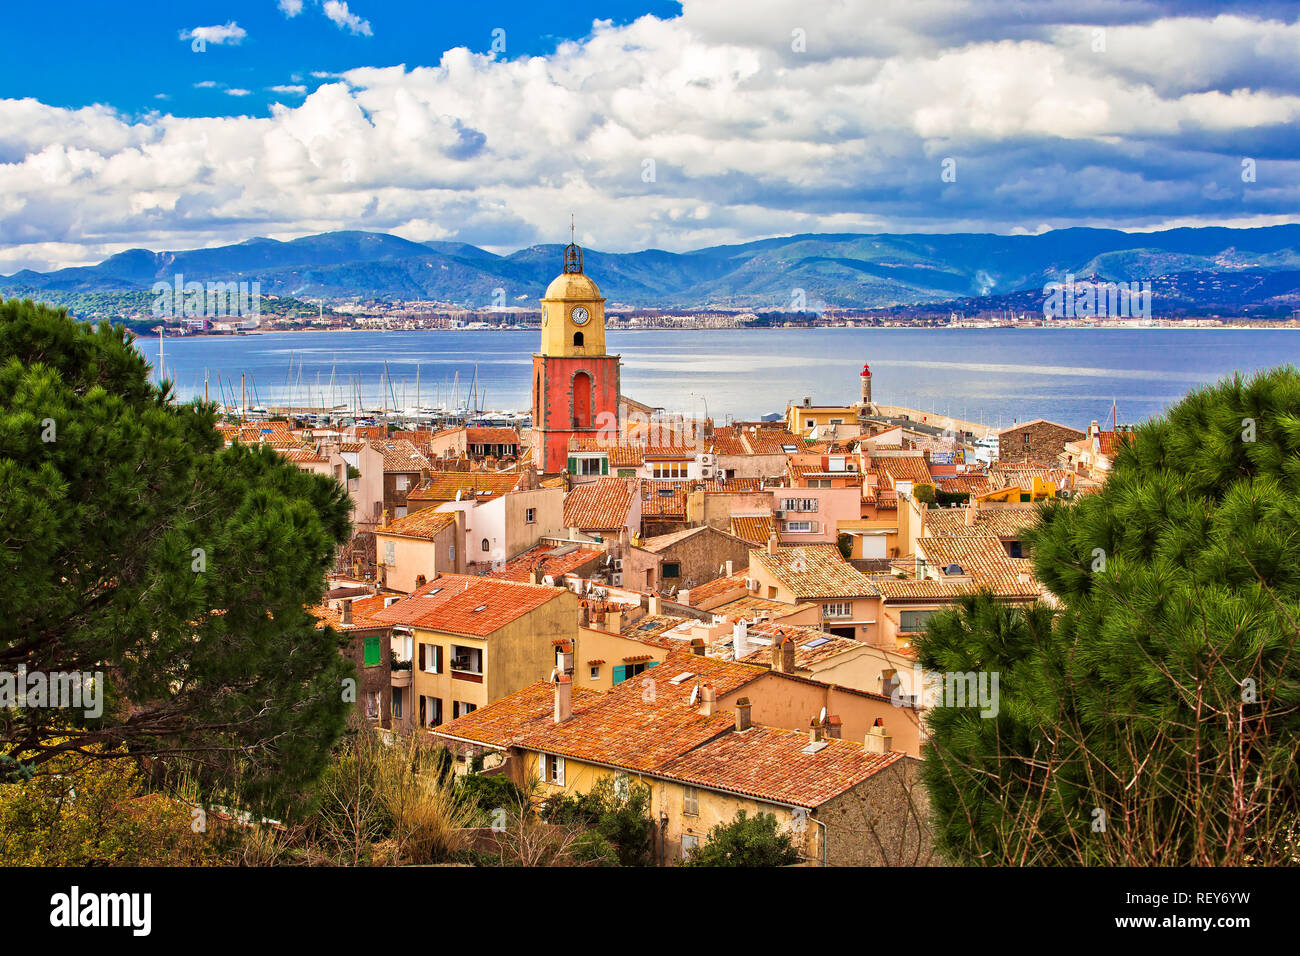 Saint Tropez village church tower and old rooftops view, famous tourist destination on Cote d Azur, Alpes-Maritimes department in southern France Stock Photo